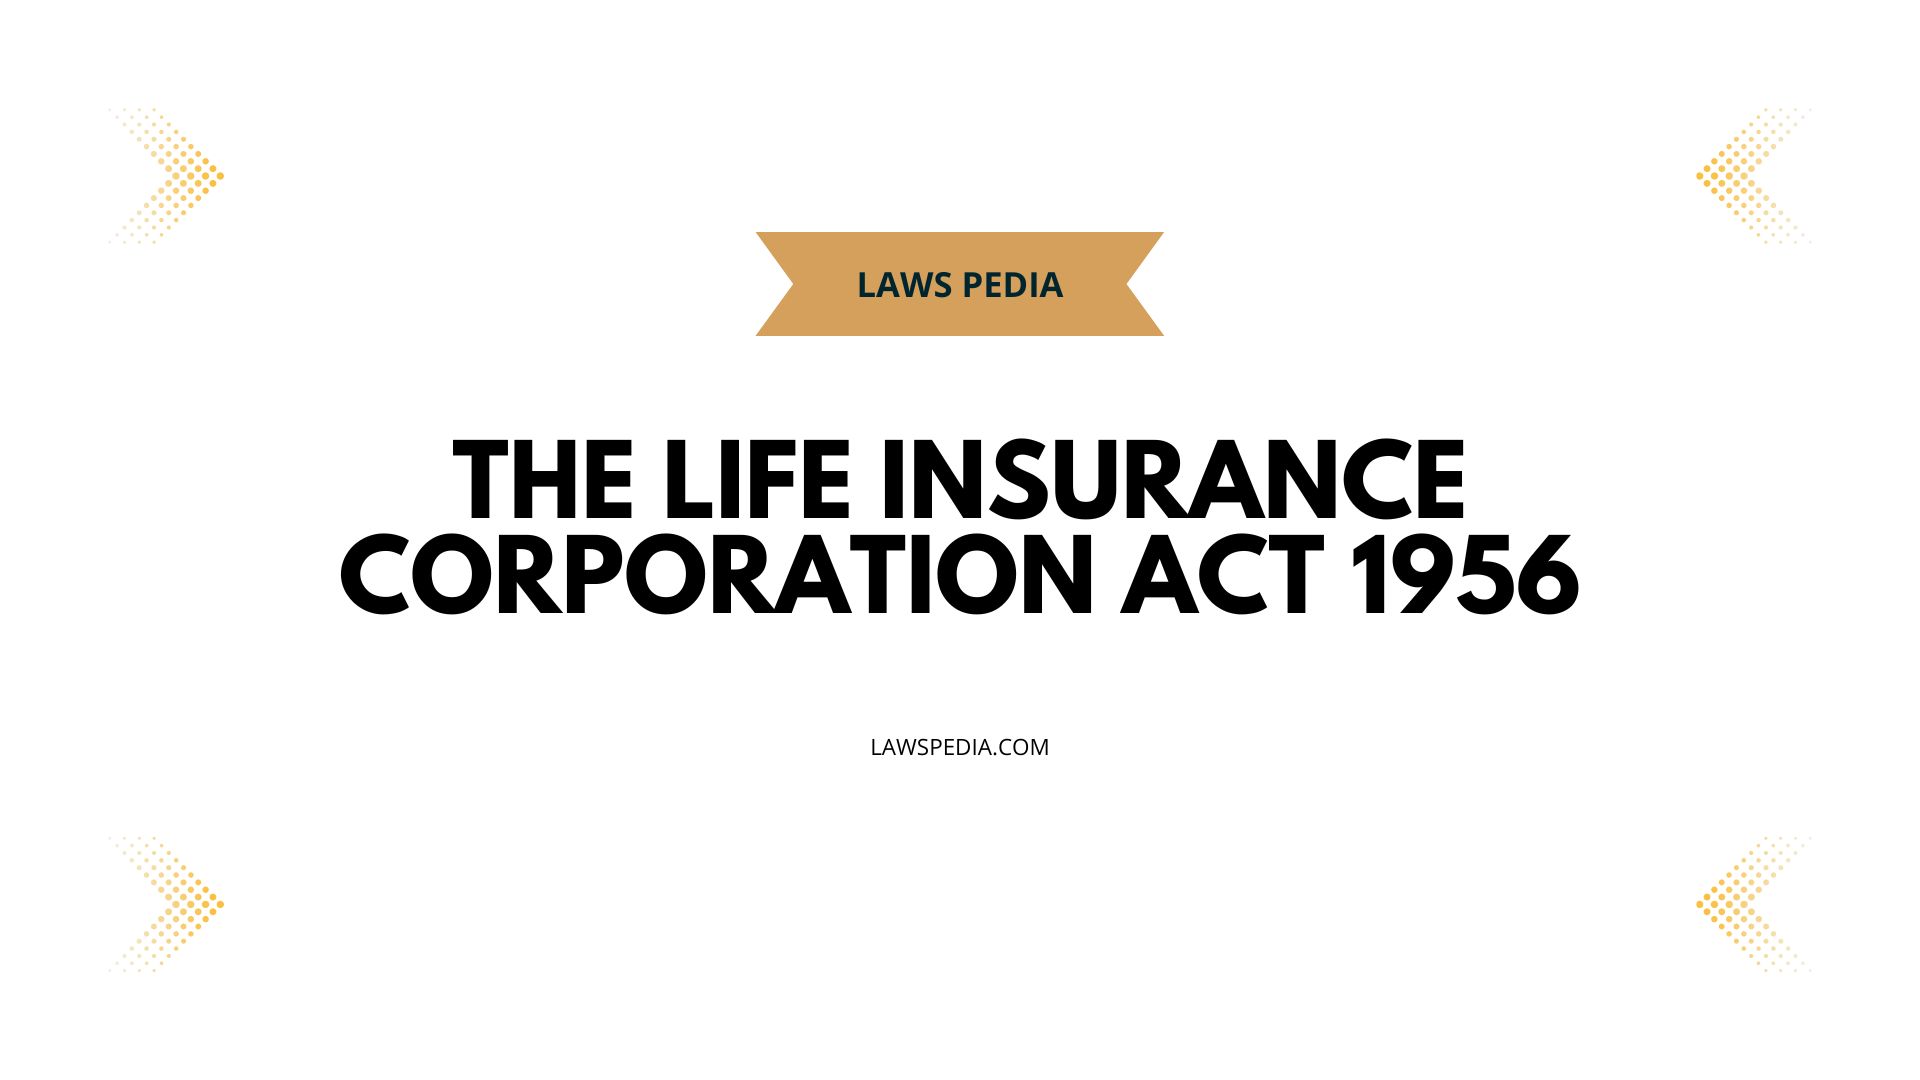 The Life Insurance Corporation Act 1956